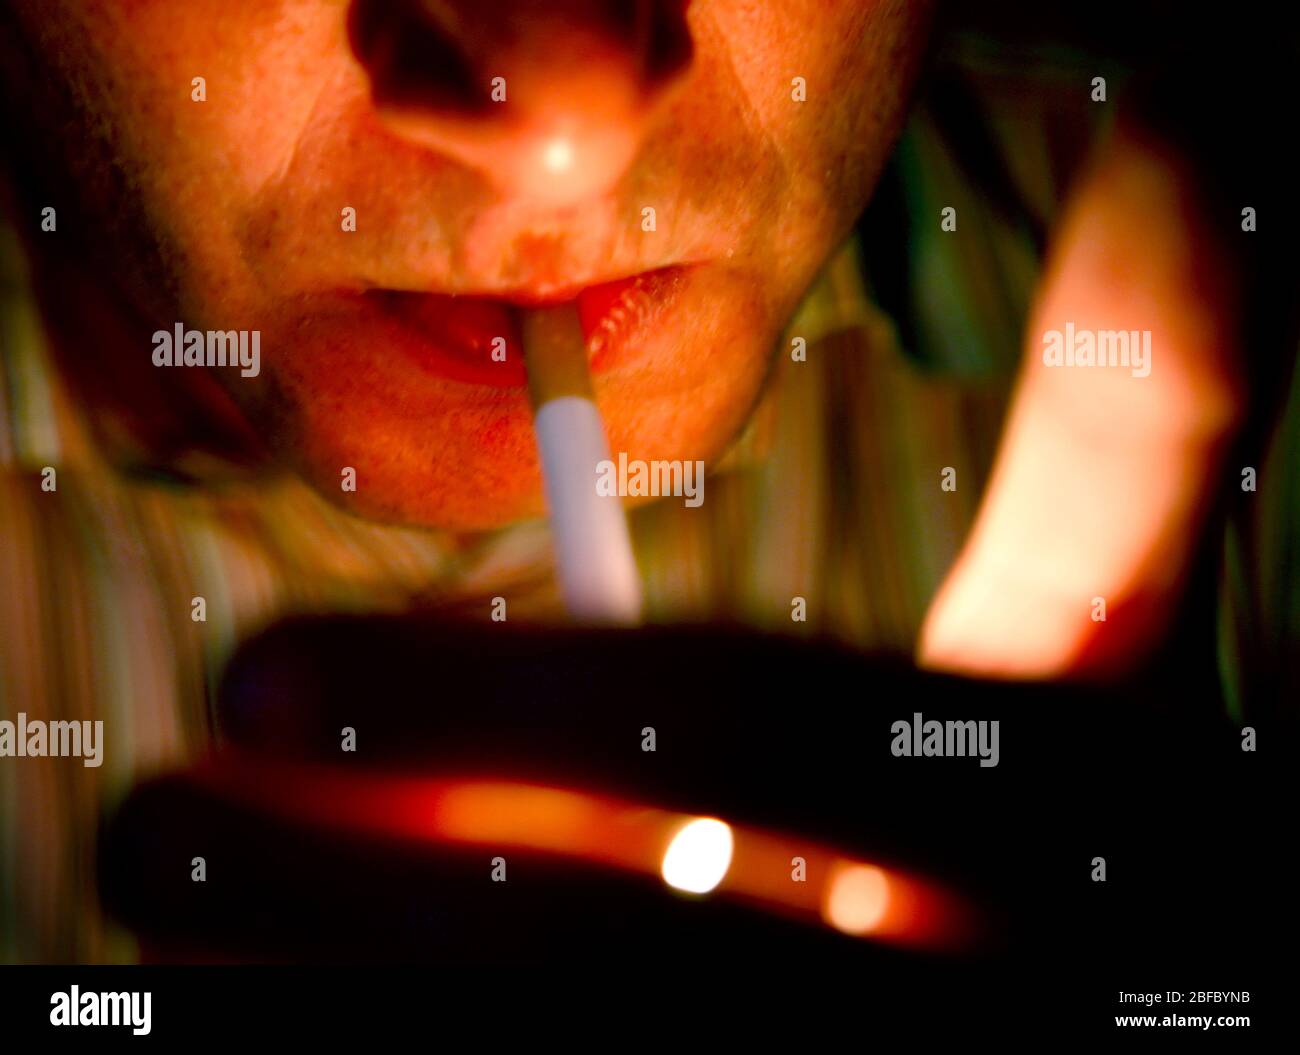 A close-up picture of a man lighting a cigarette, his face solely lit by the light of a lighter Stock Photo